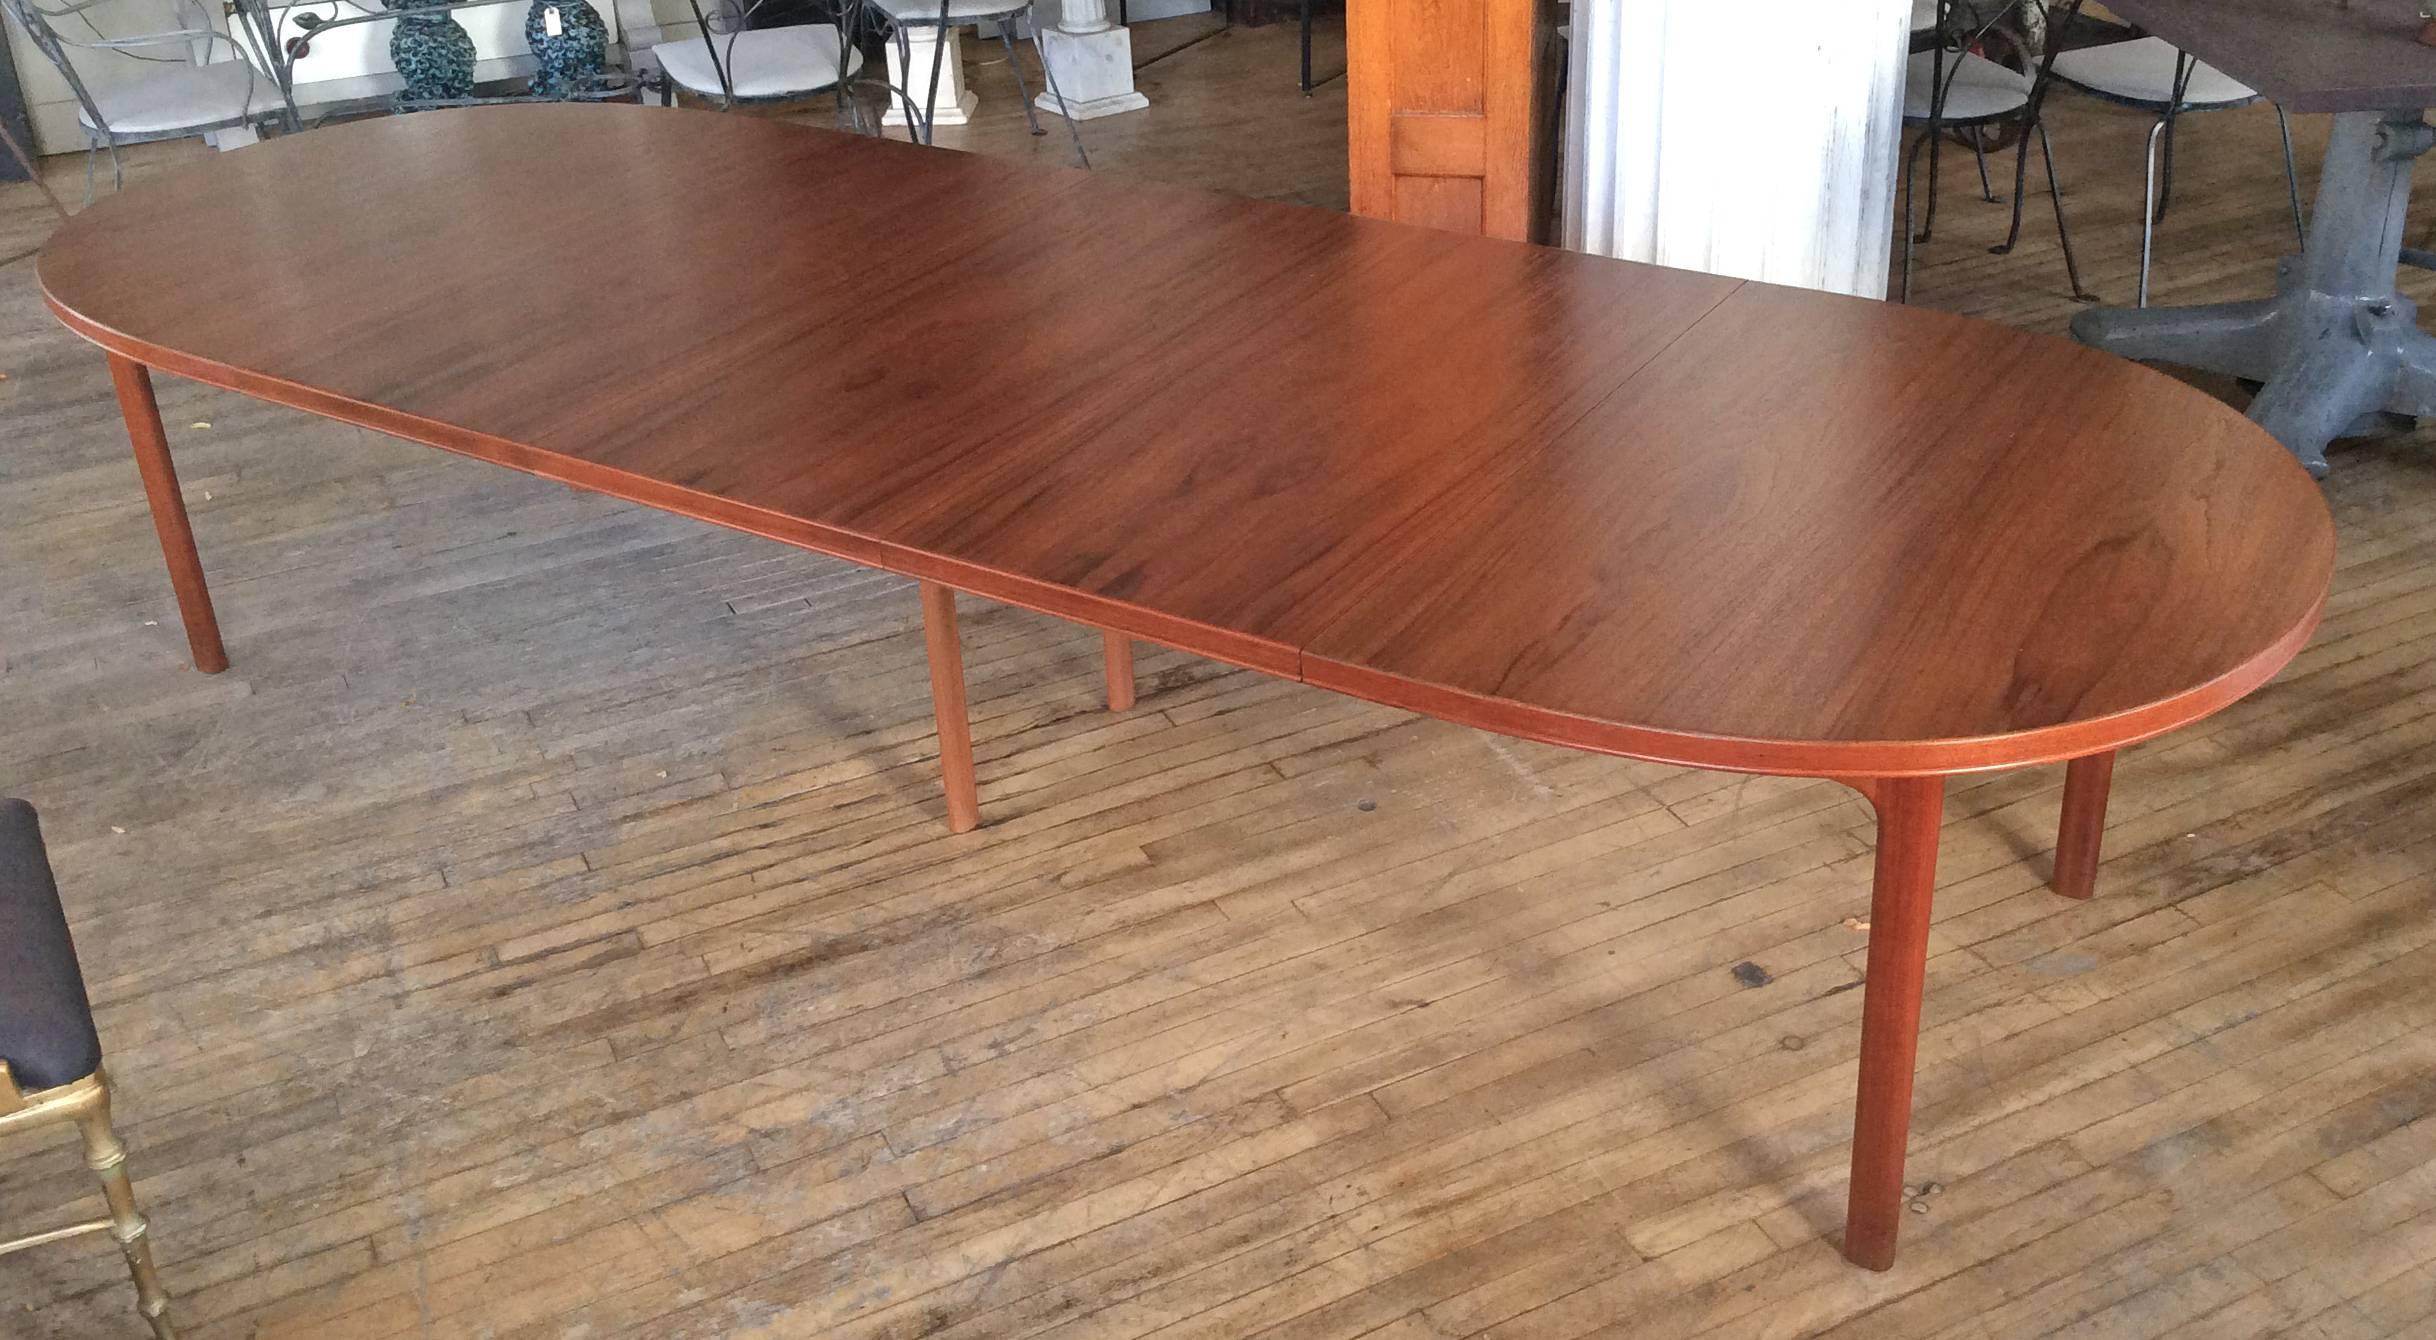 A beautiful vintage 1960s oval teak extension dining table by DUX, with three large leaves, giving the option of an full 11.5' table for the largest of parties. Stunning teak grain, and very solid and stable, with a hidden center leg that drops down